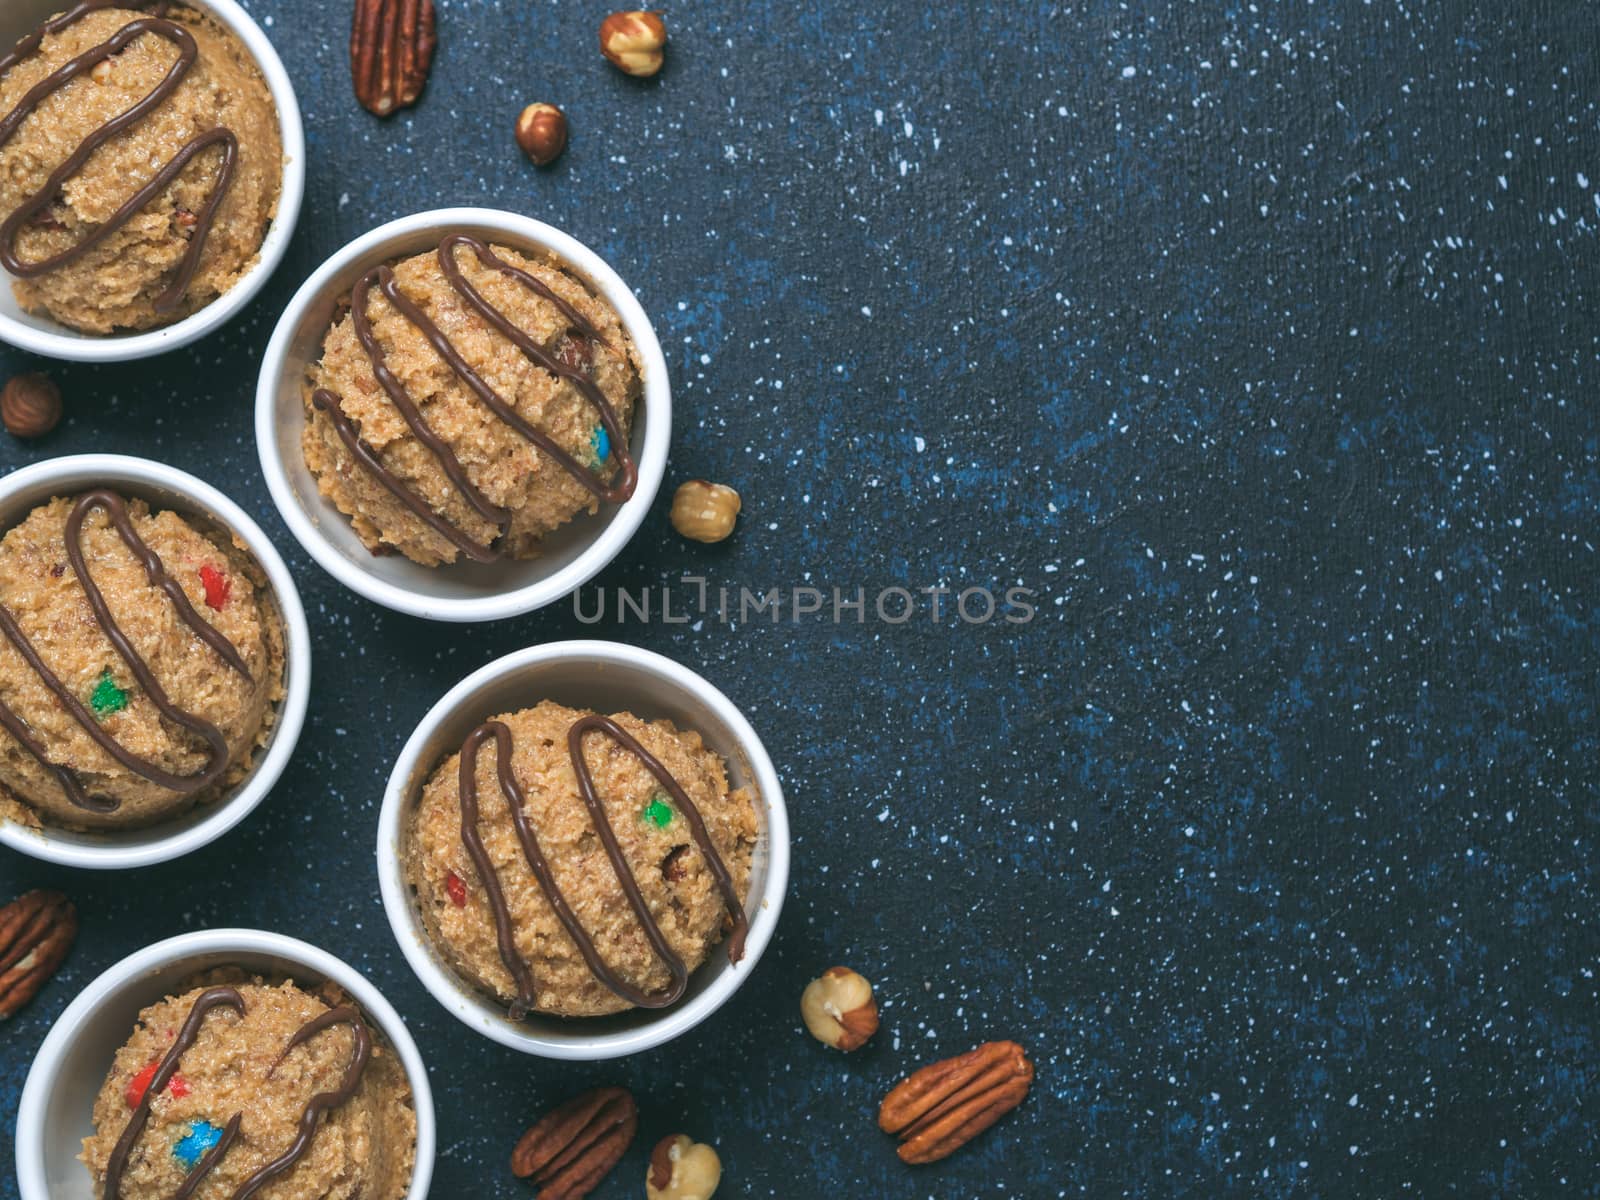 Safe-to-eat raw monster cookie dough in small portion bowl on dark blue background. Ideas and recipes for kids and toddlers meal. Top view or flat-lay. Copy space for text.